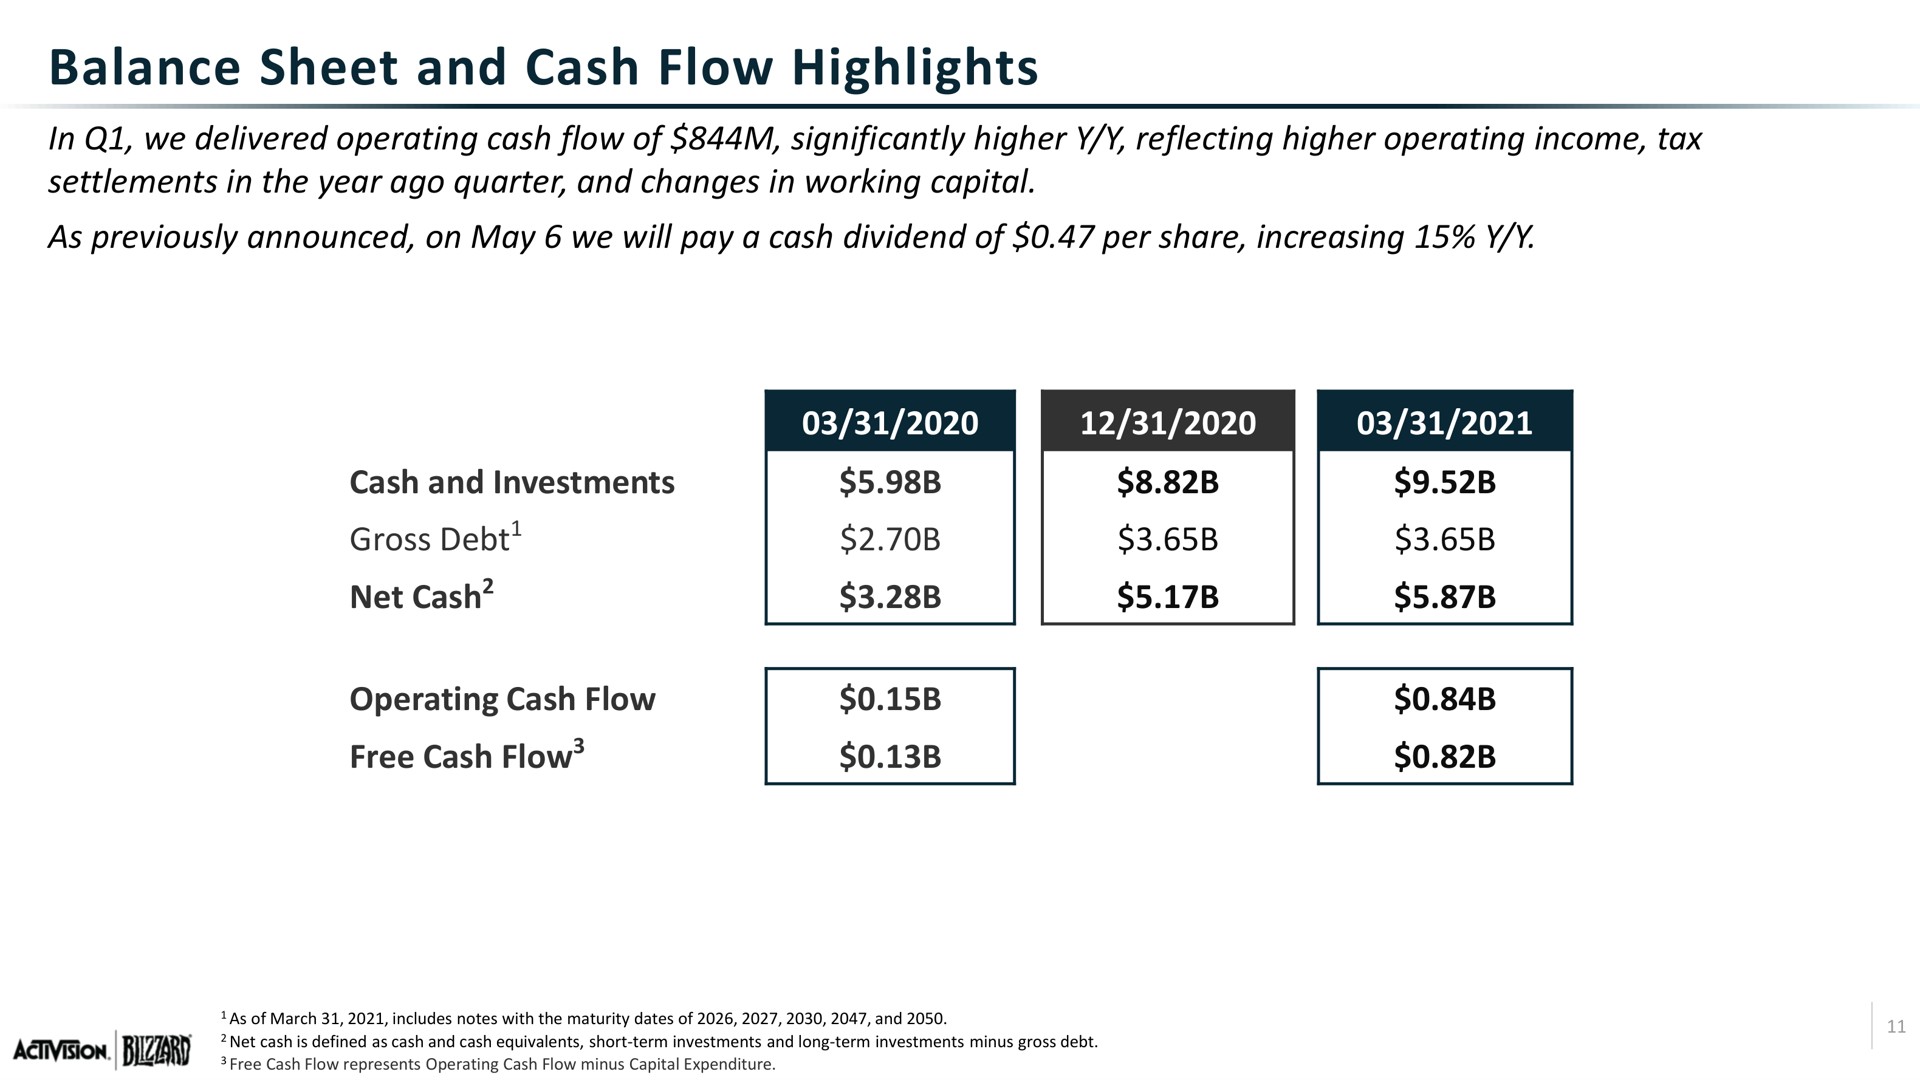 balance sheet and cash flow highlights free | Activision Blizzard